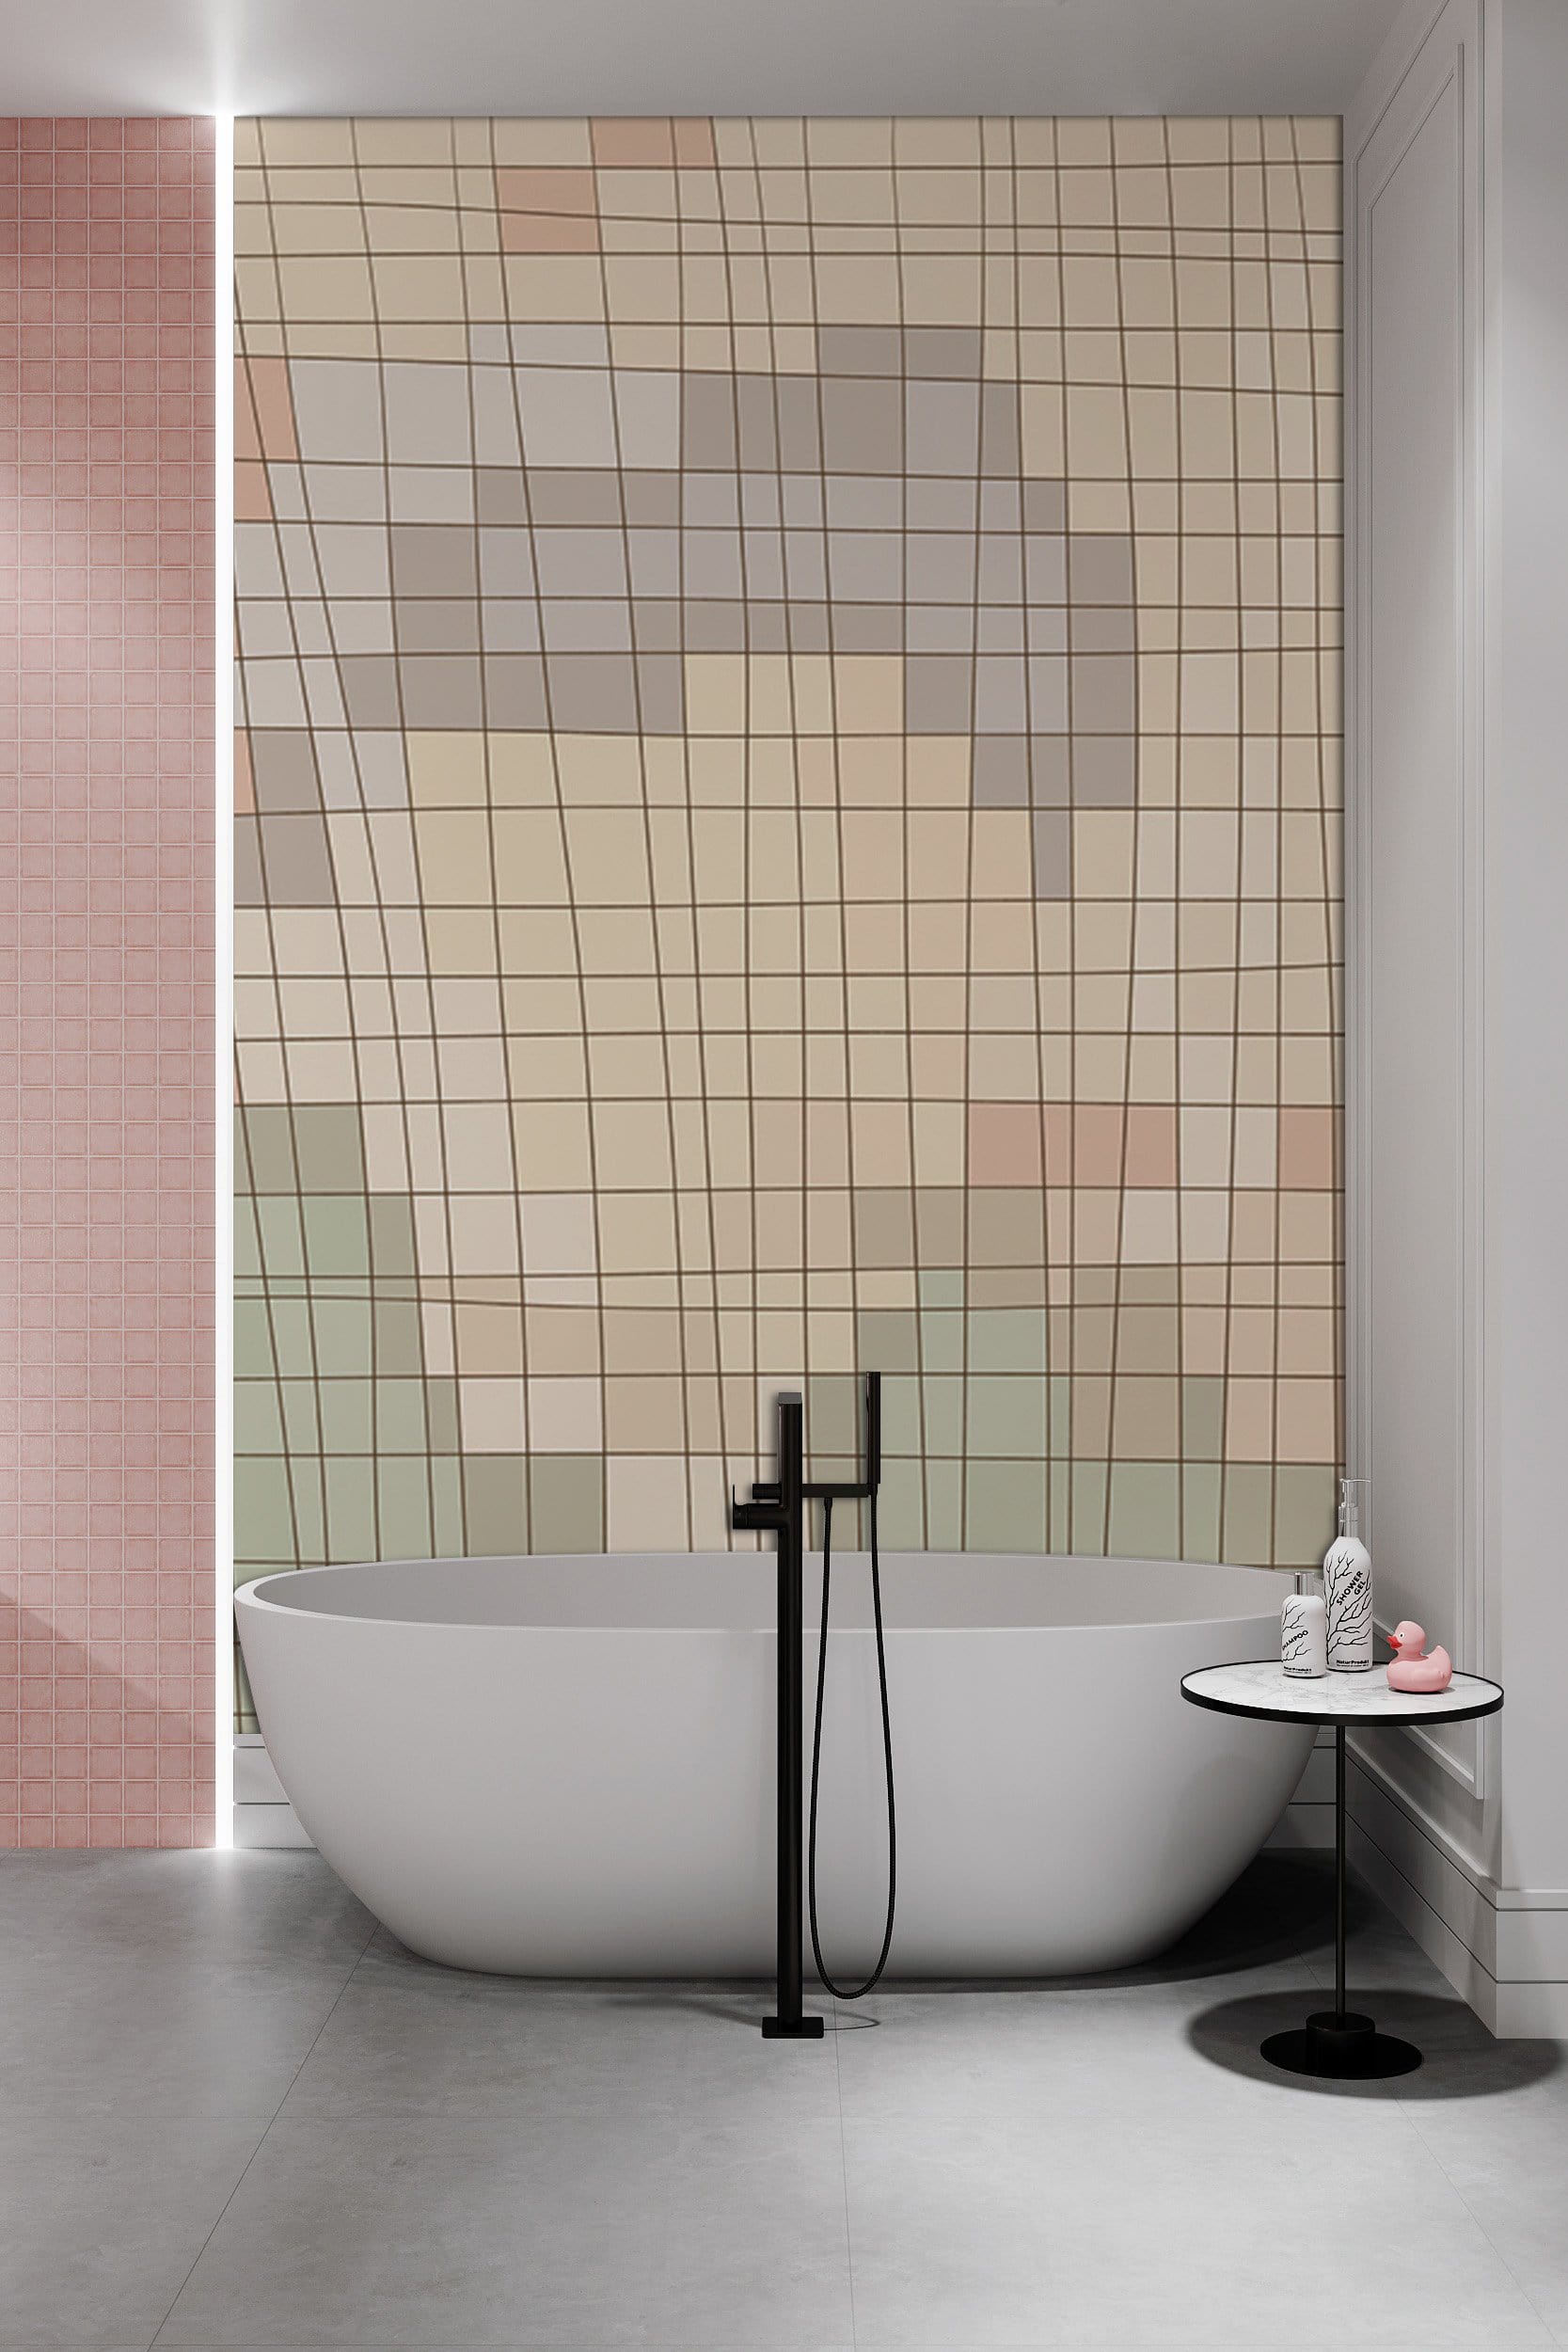 Van Gogh Bathroom Wall Mural Decor Featuring a Soft-Color Illustration of the Artist